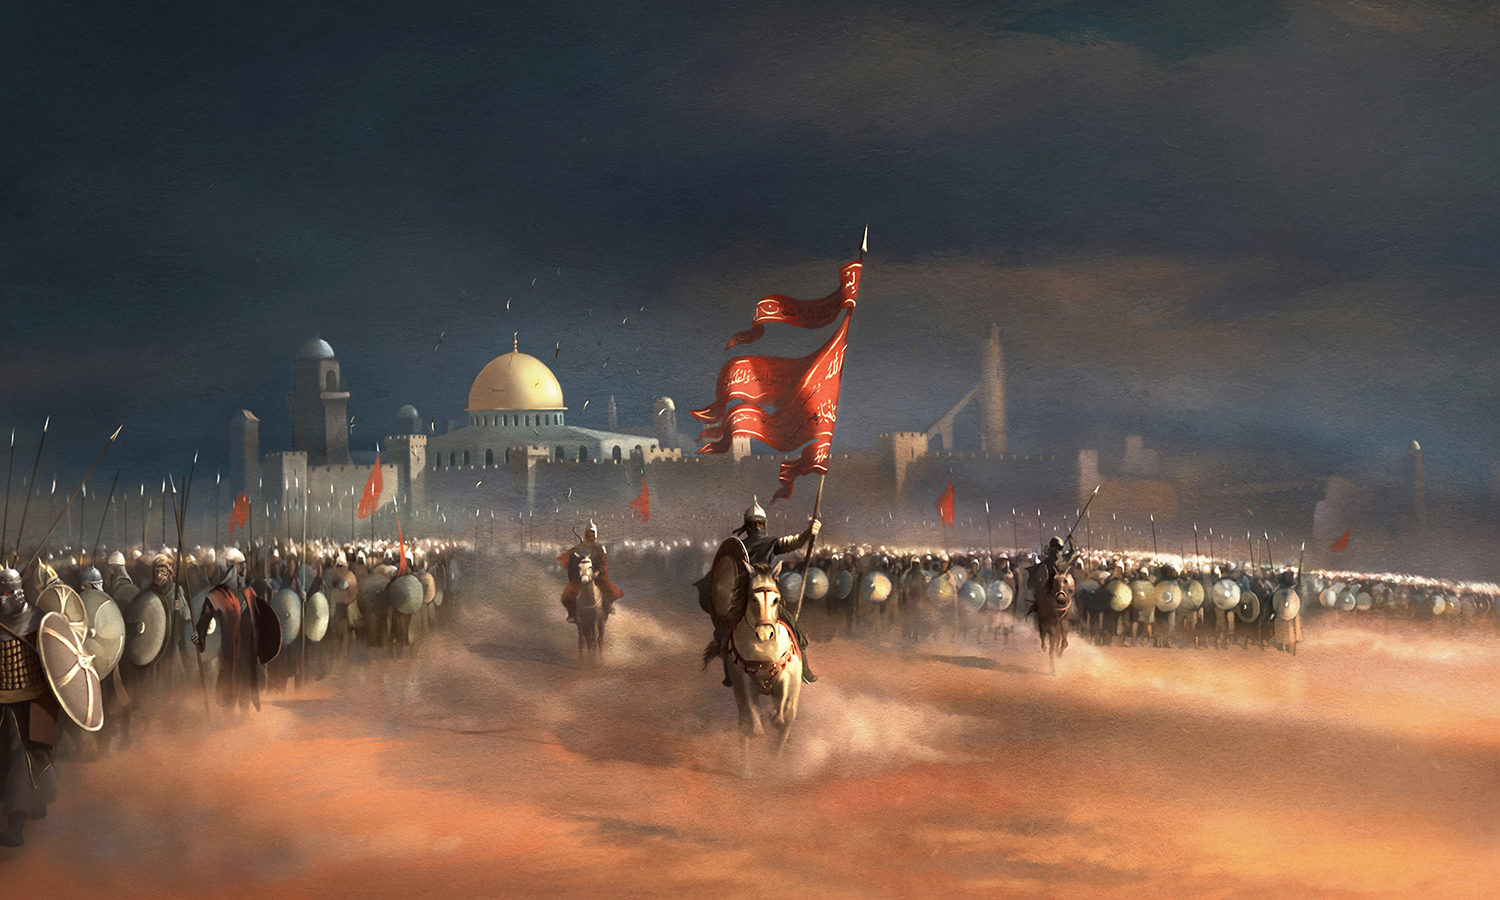 To the glory of Saladin